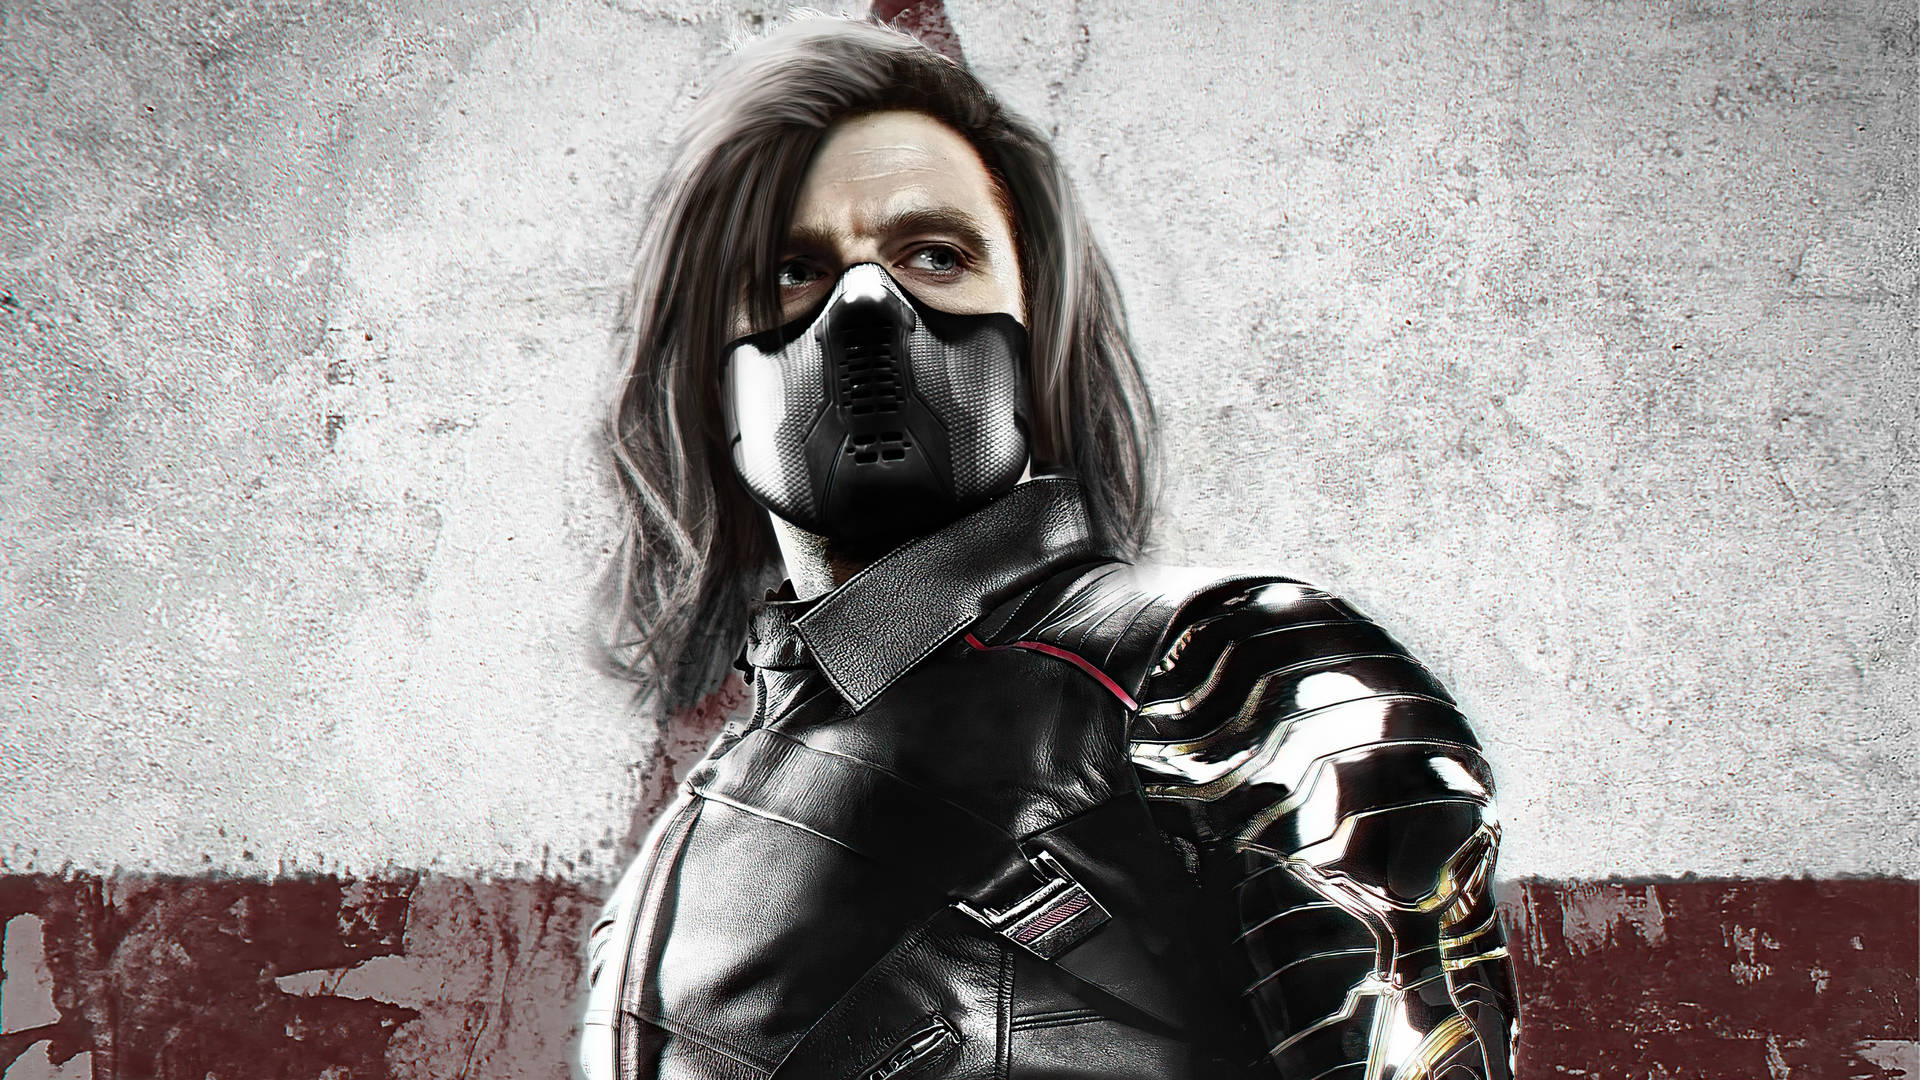 Winter Soldier With Mask